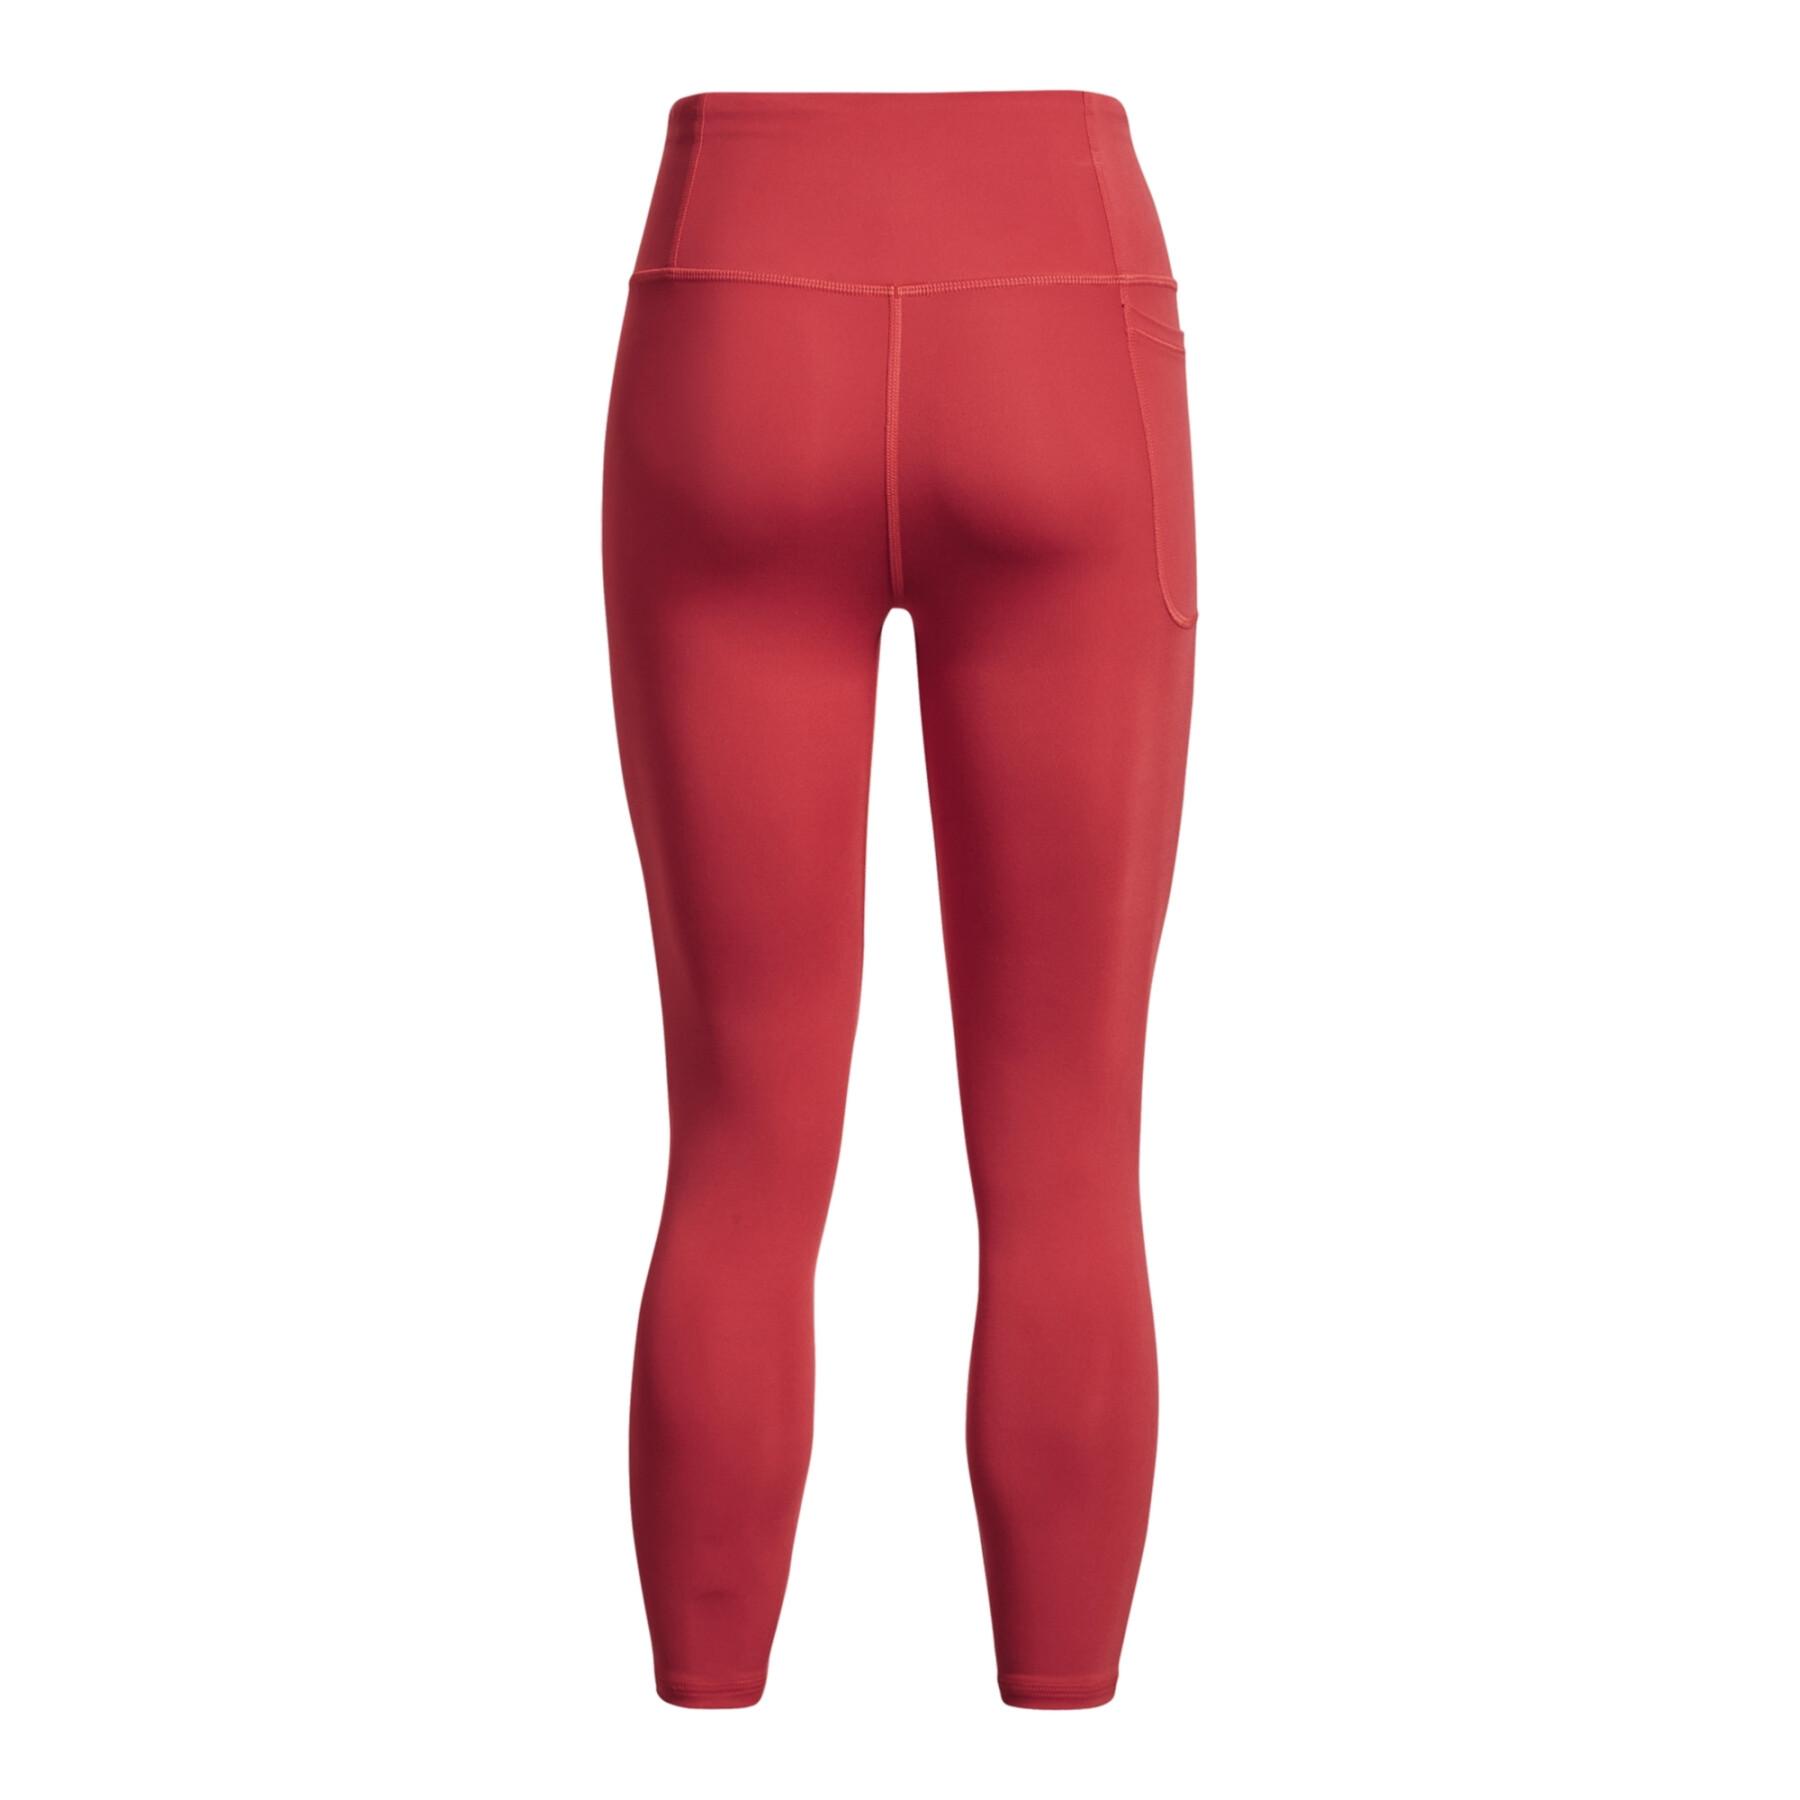 Legging woman Under Armour Motion Branded